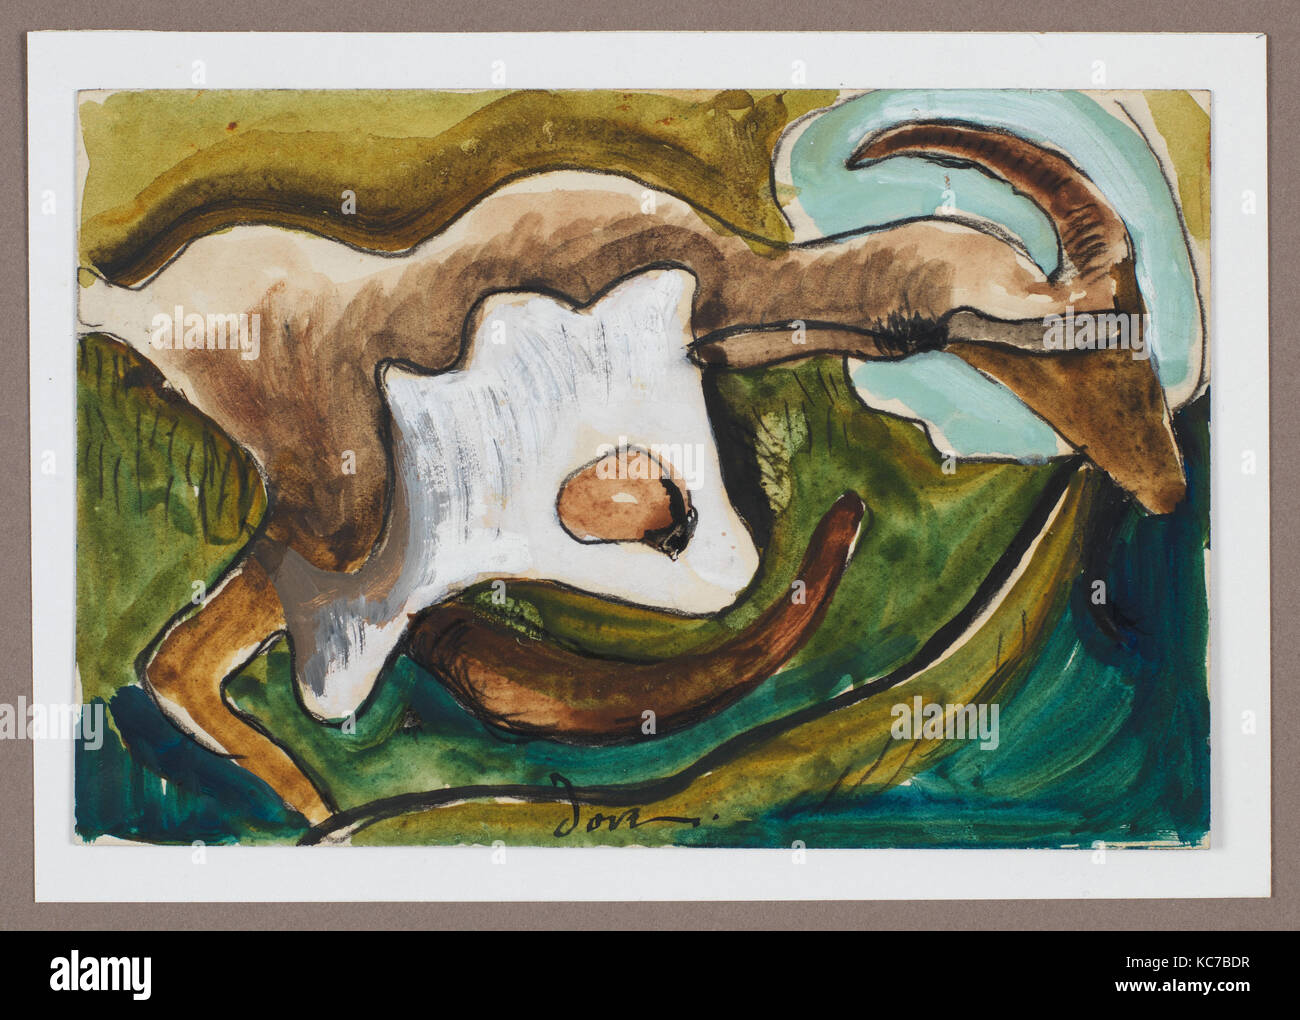 Study for 'Goat', ca. 1934, Watercolor, gouache, and graphite on paperboard, 4 x 6 in. (10.2 x 15.2 cm), Drawings, Arthur Dove Stock Photo